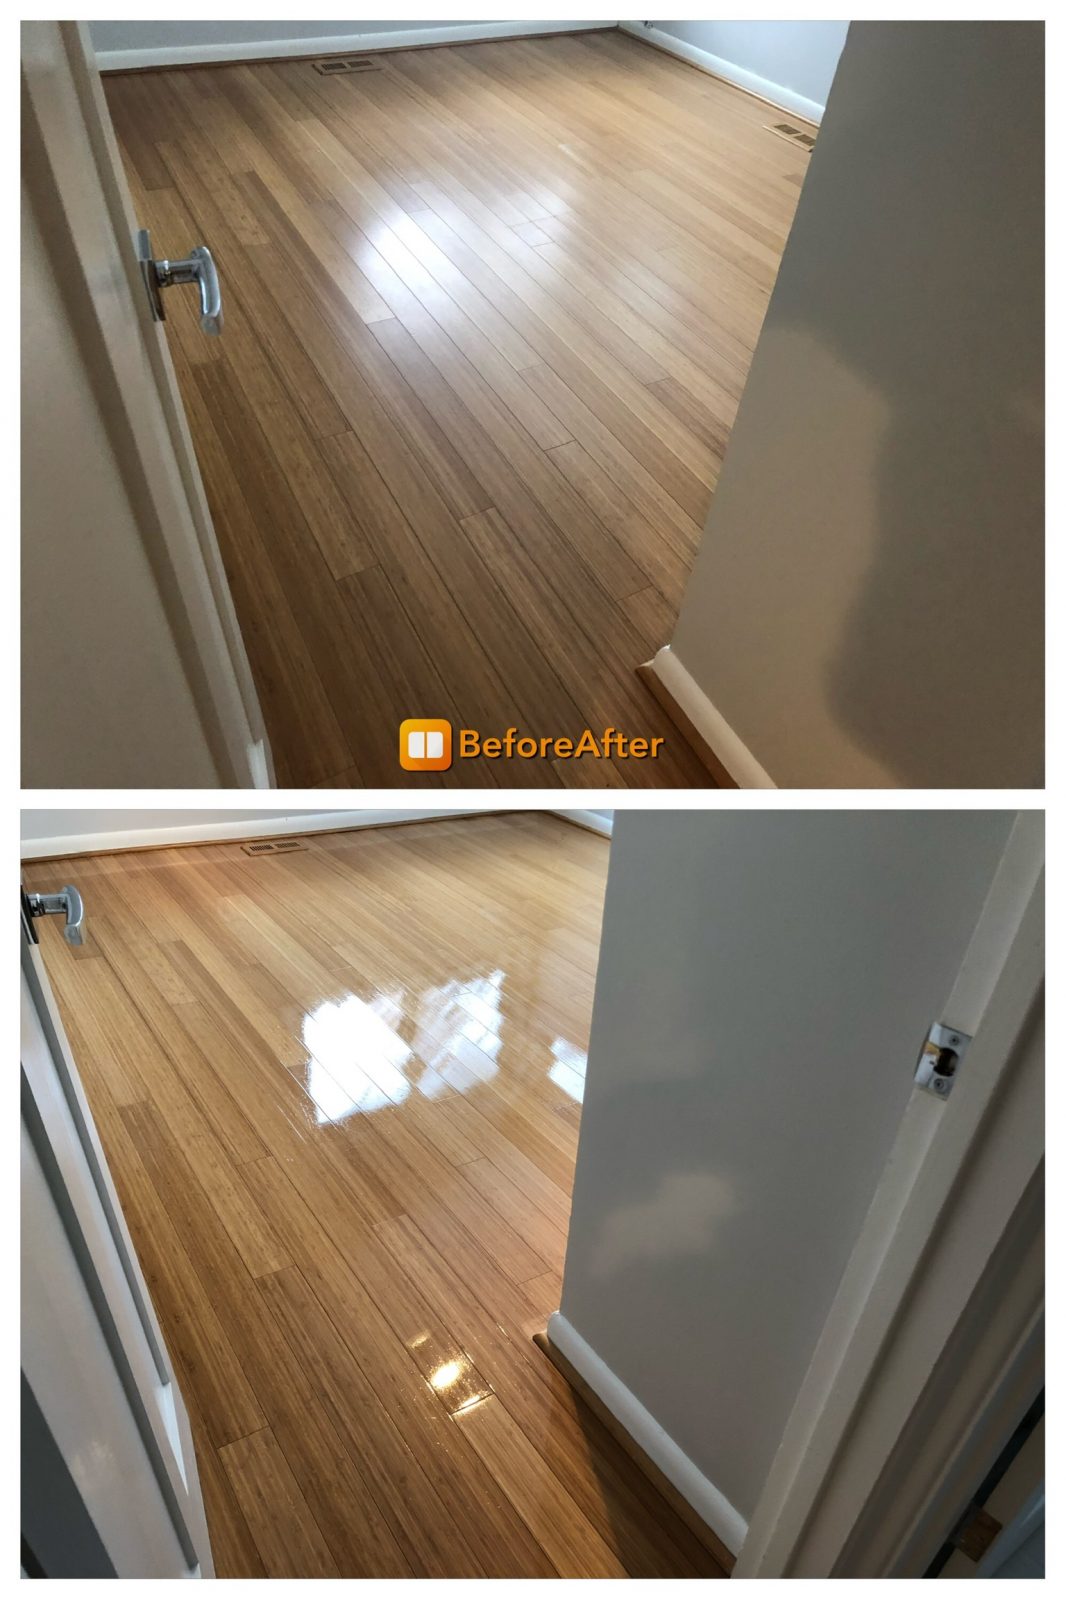 Professional Hardwood Floor Cleaning Amberley Ohio by Howards Cleaning Service